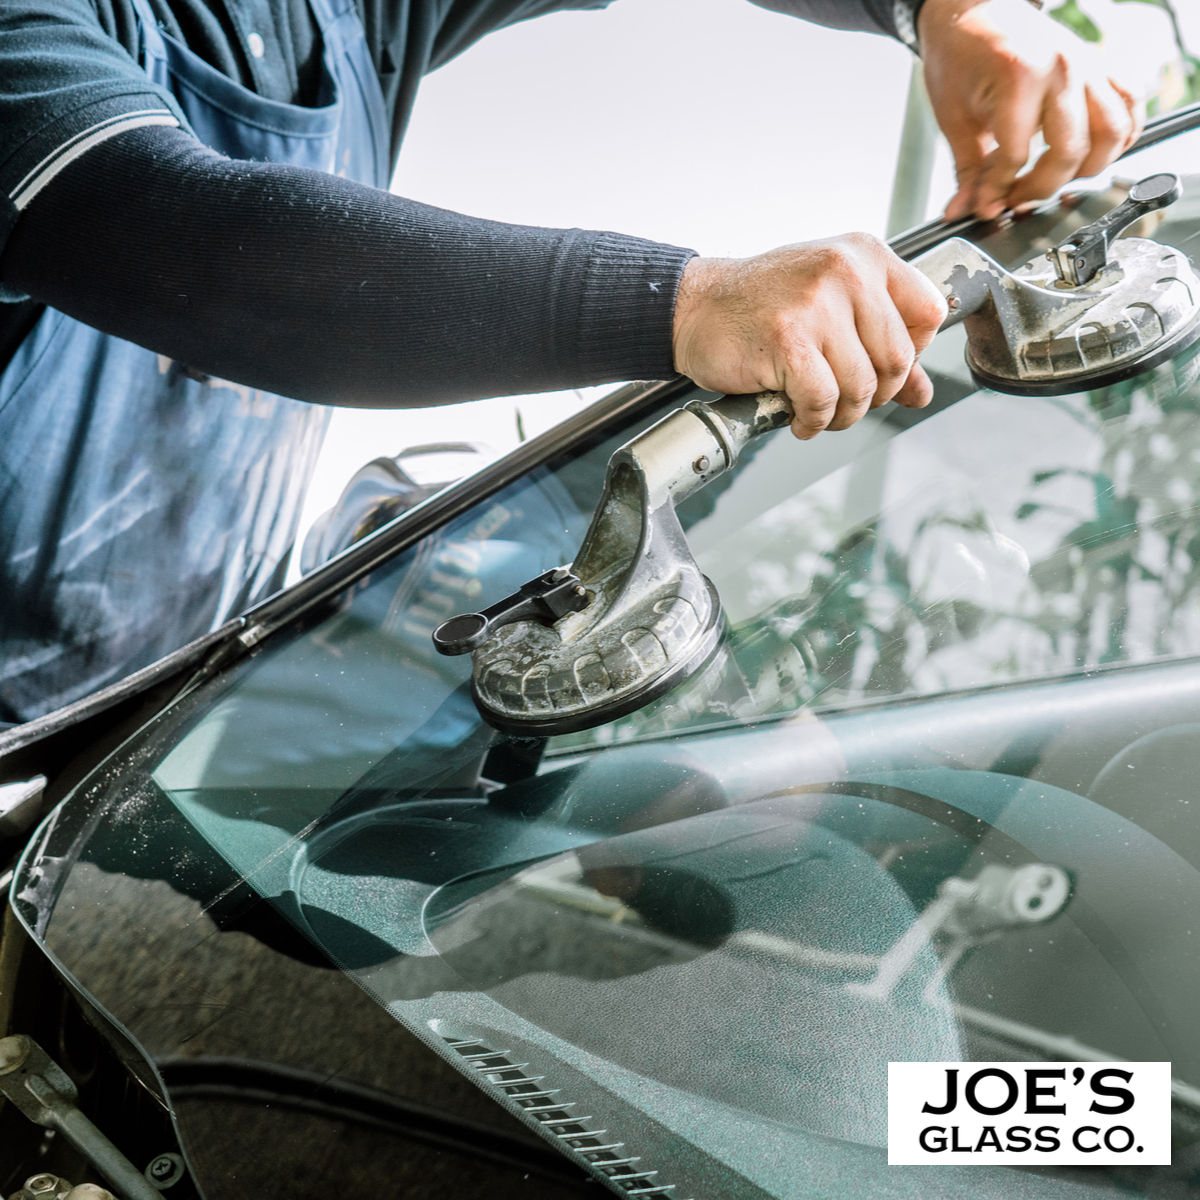 Call Joe’s Glass Co. for a Quote on Your Automobile’s Windshield Re-Calibration!